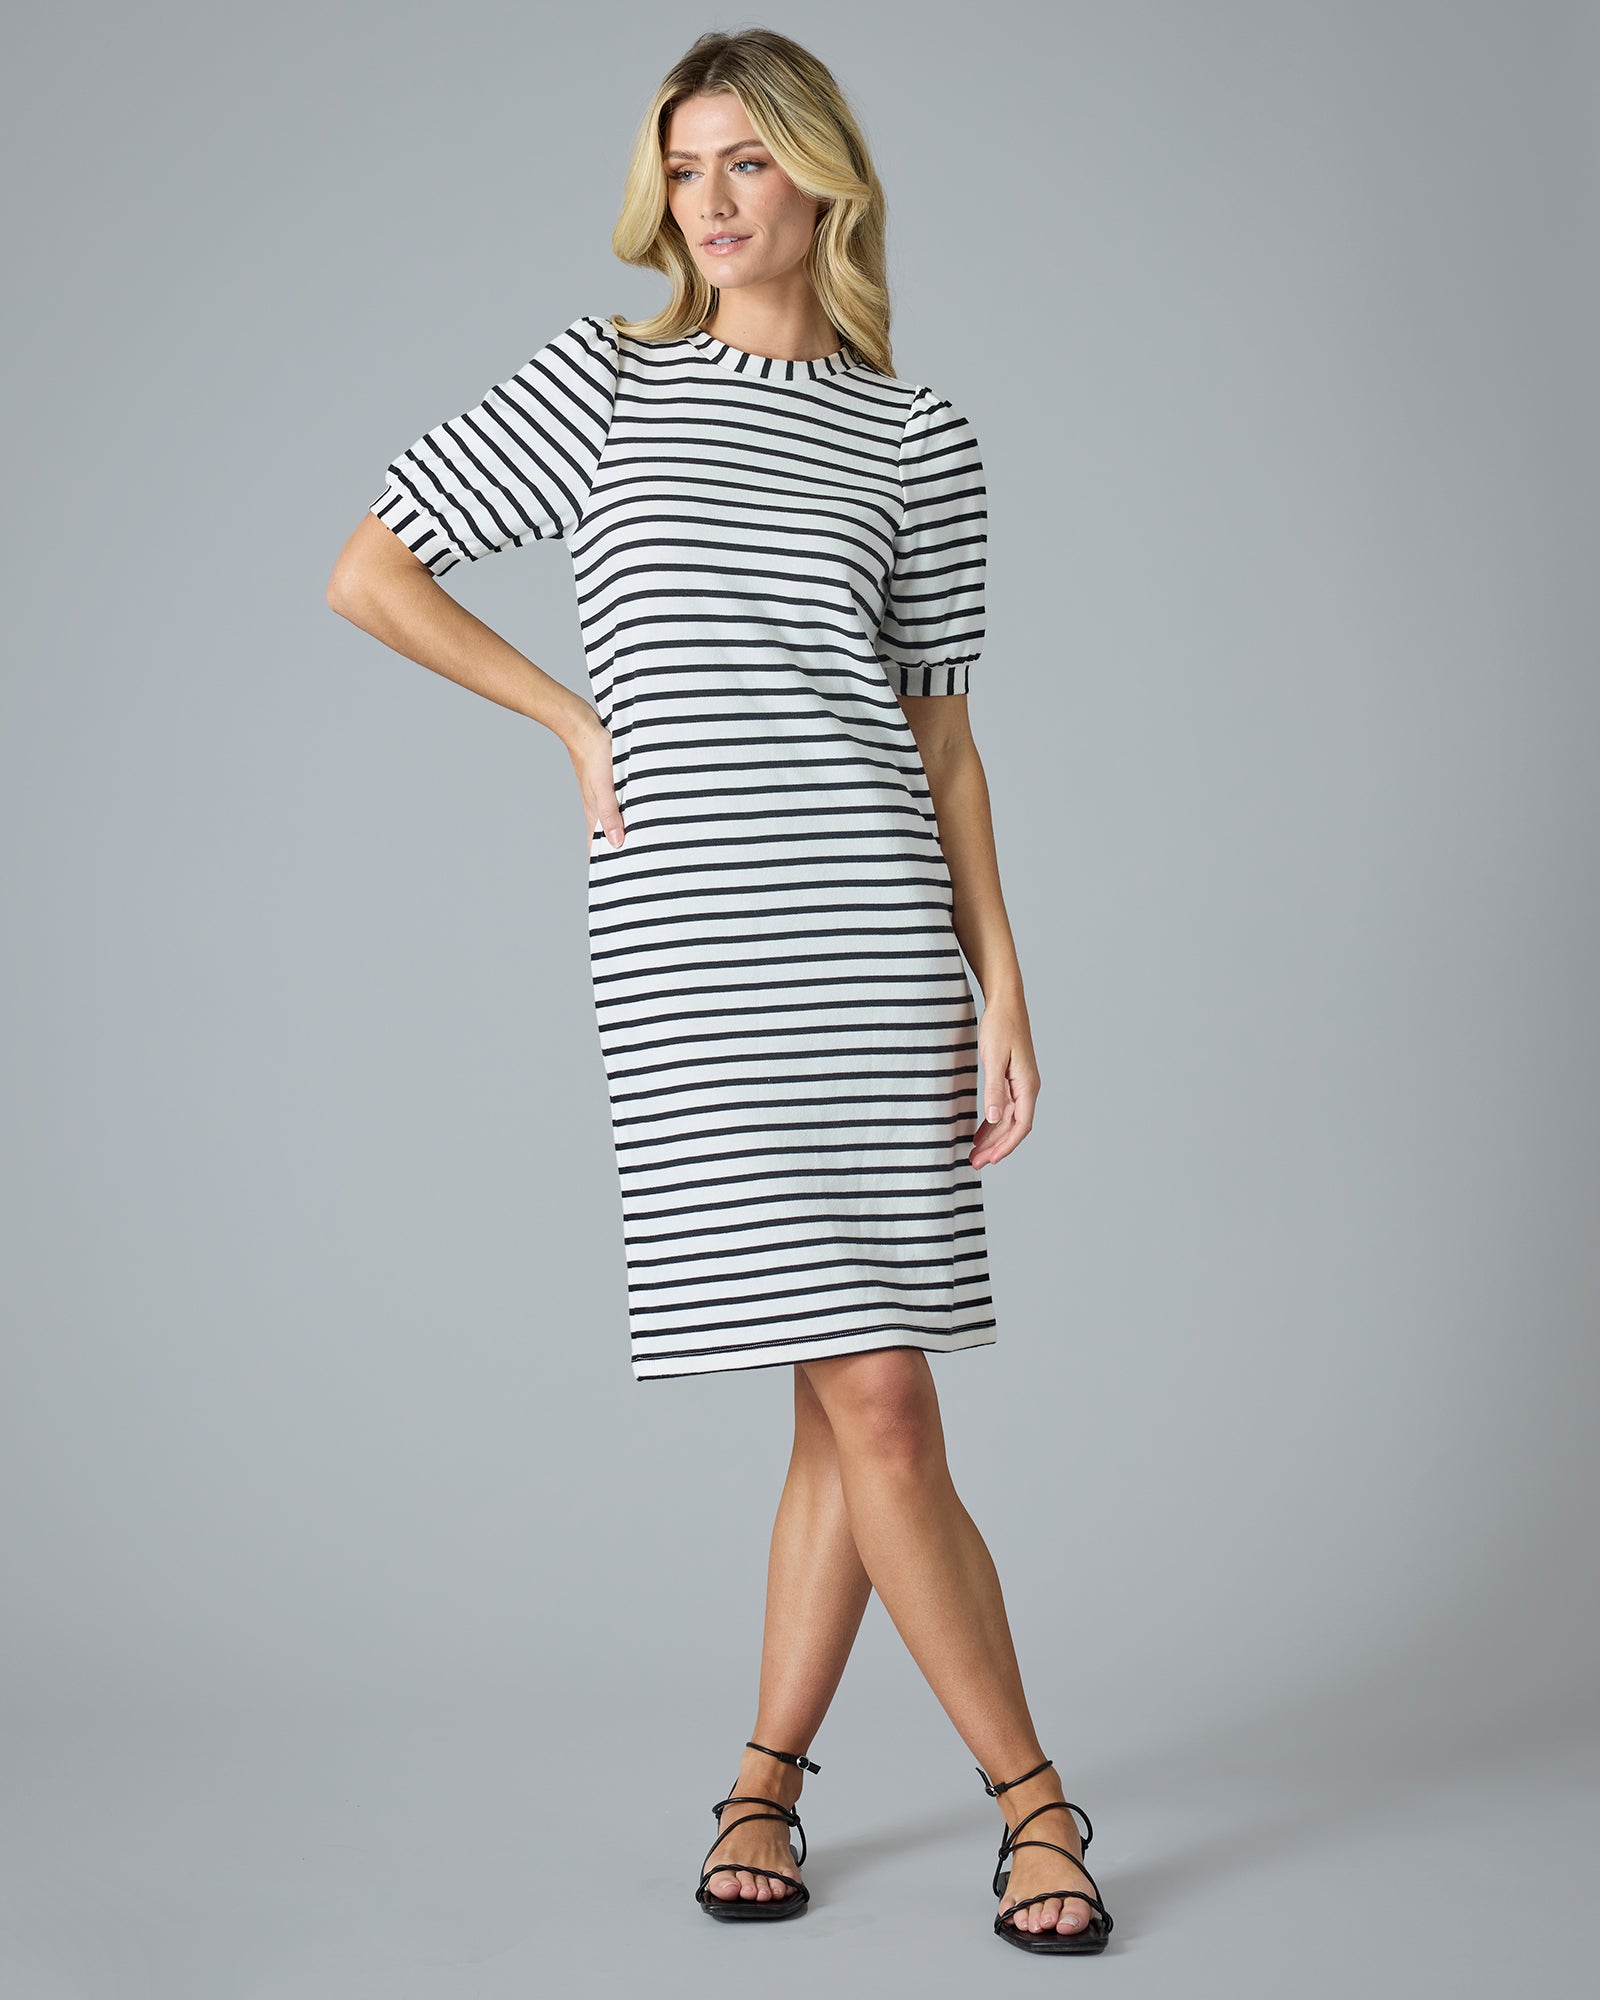 Woman in a short sleeve, navy and cream striped knee-length dress